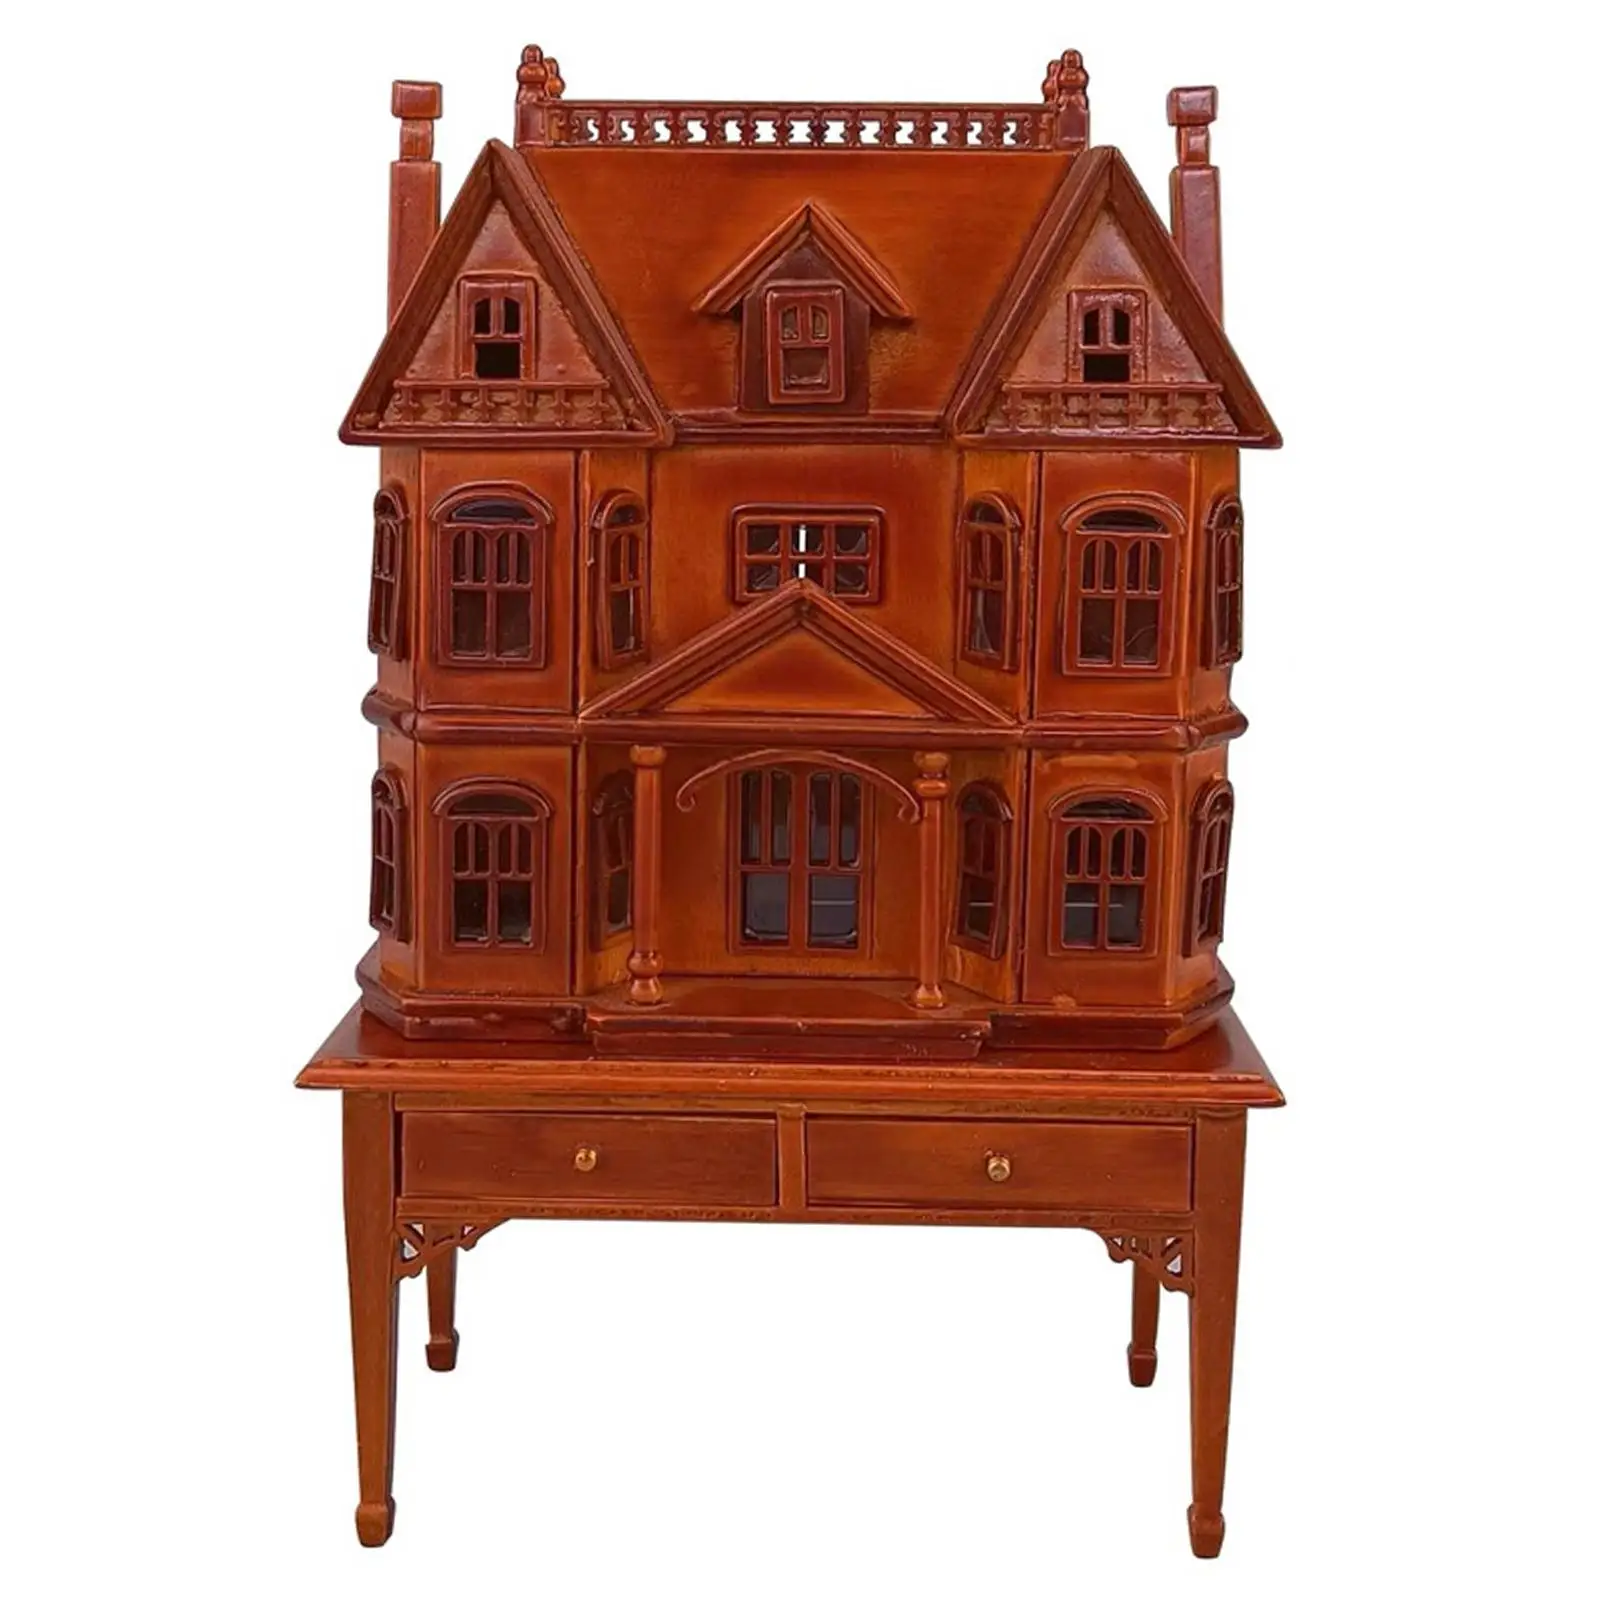 Dollhouse Miniature 1/12 Scale Table Display Cabinet Villa Gifts Creative Wooden